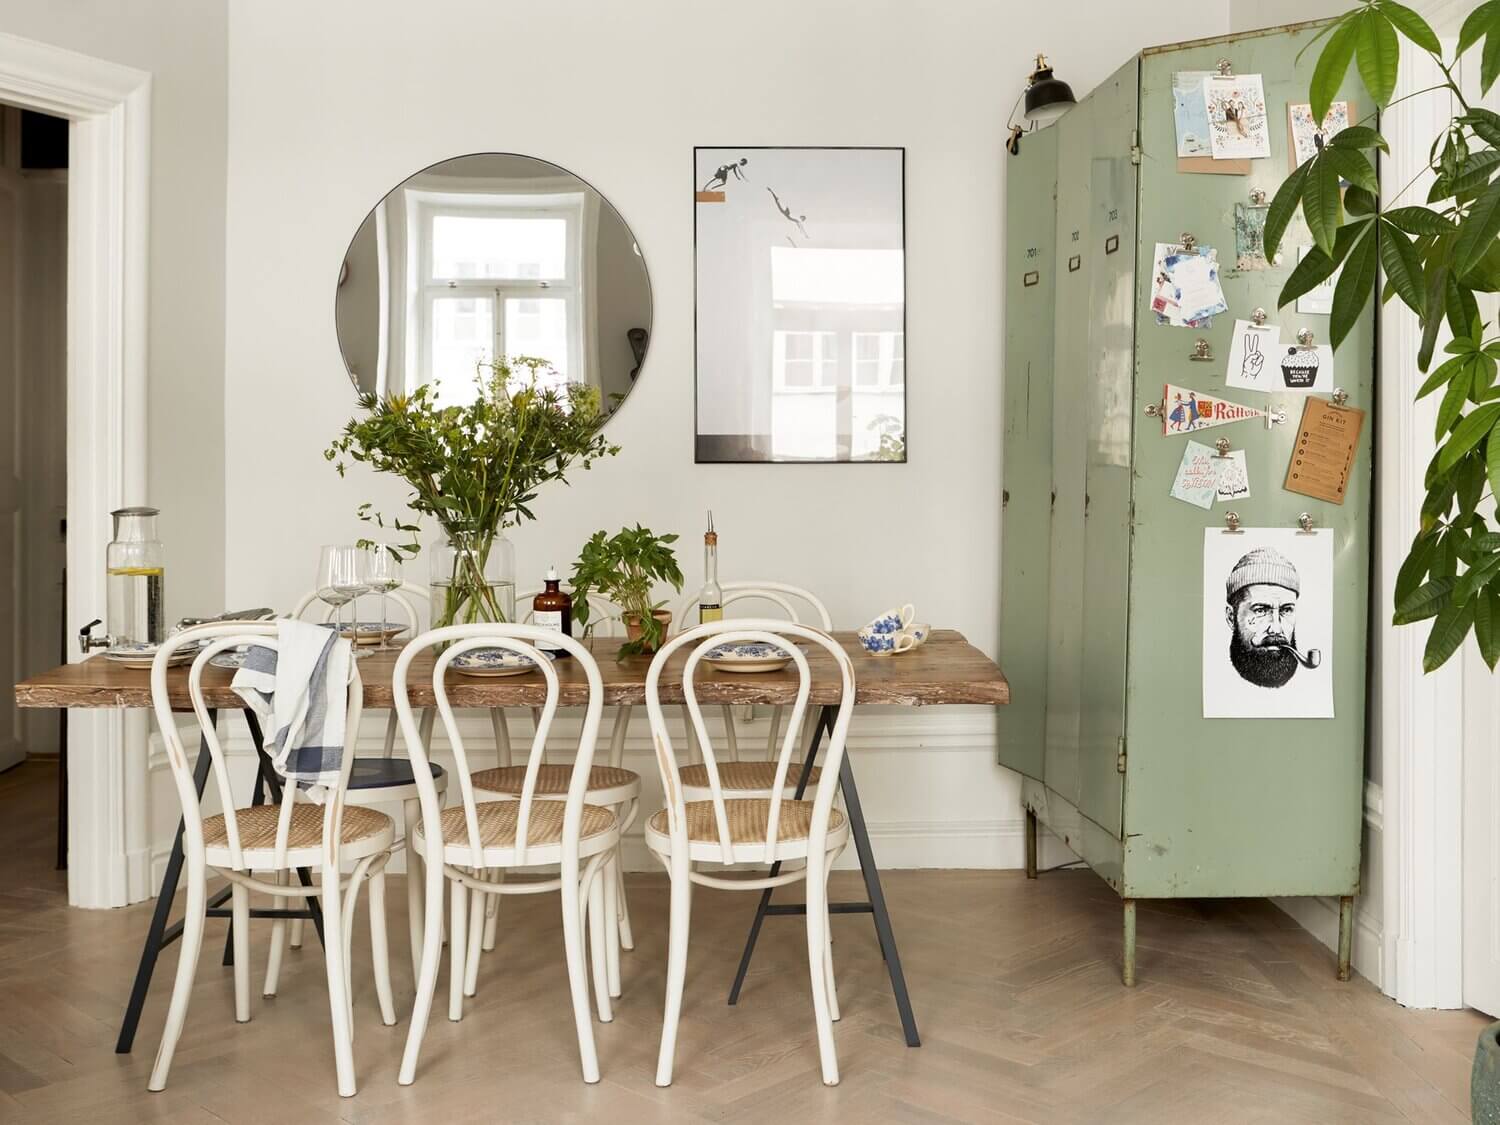 light apartment vintage touches nordroom5 A Light Scandinavian Apartment with Vintage Touches